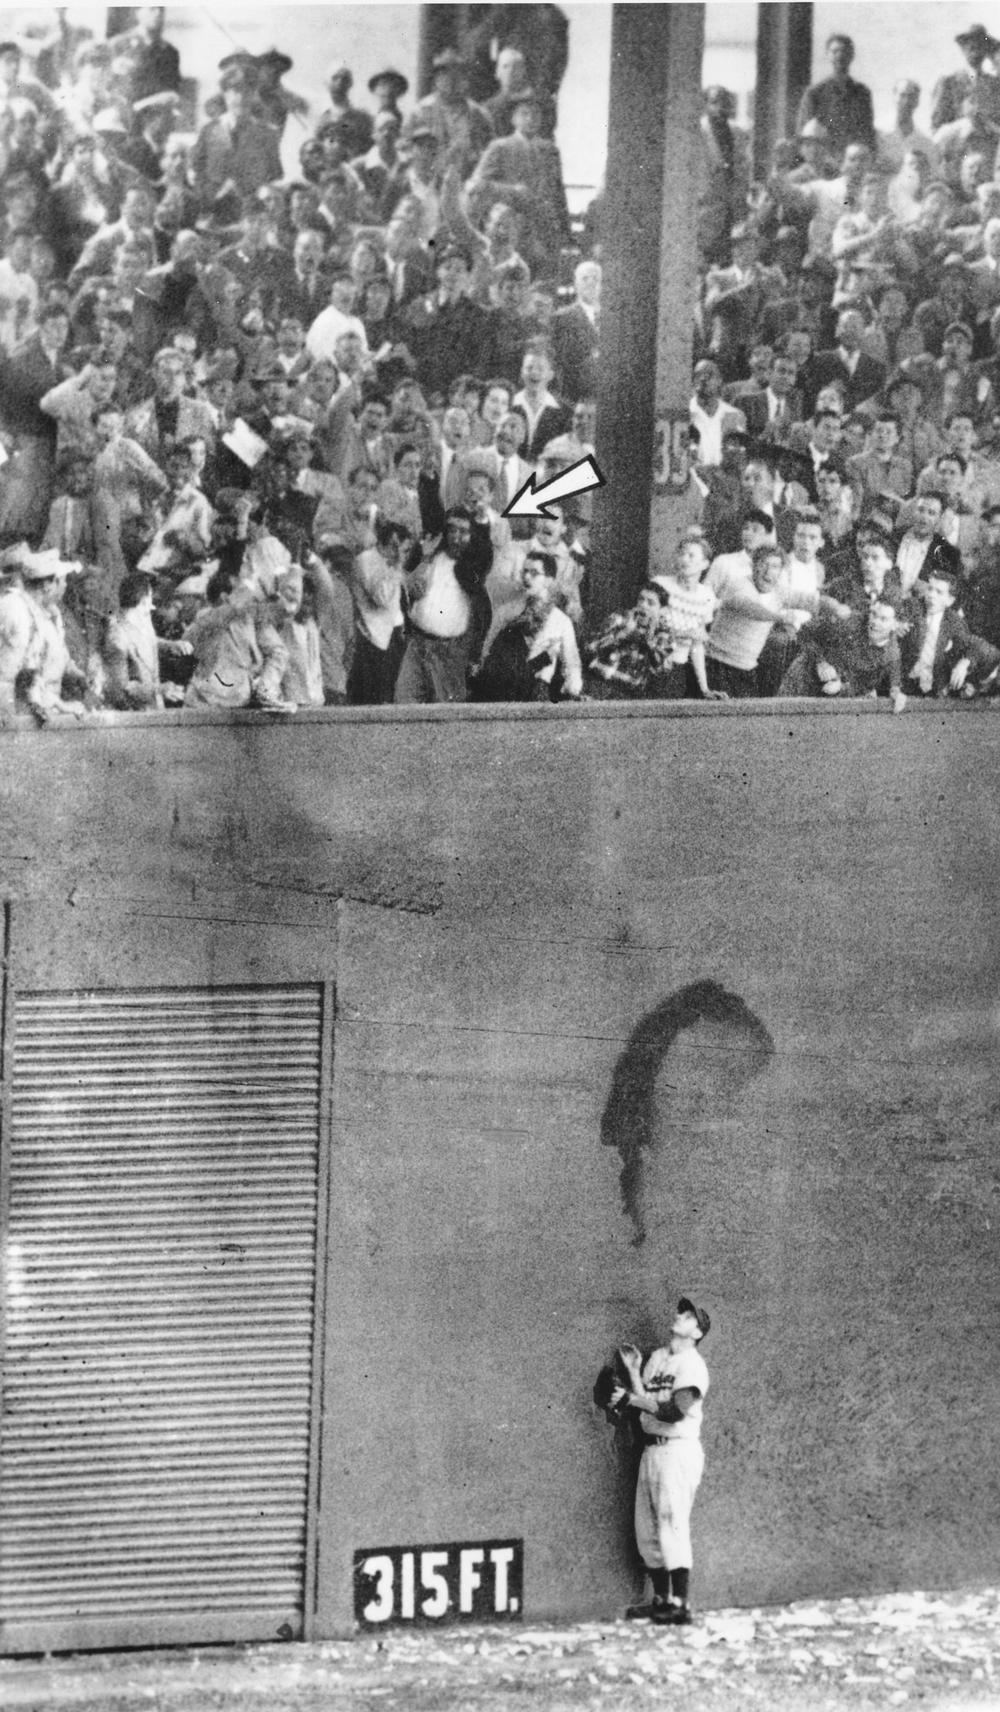 Brooklyn Dodgers left fielder Andy Pafko watches as the ball sails over the wall and drops into the lower deck of seats for New York Giants Bobby Thomson's three-run homer in the bottom of the ninth inning of the playoff game at the Polo Grounds in New York City on Oct. 3, 1951.  The roundtripper gave the Giants a 5 to 4 victory and the National League pennant.  The Giants will play the New York Yankees of the American League in the World Series scheduled to get underway at Yankee Stadium, Oct. 4.  (AP Photo)